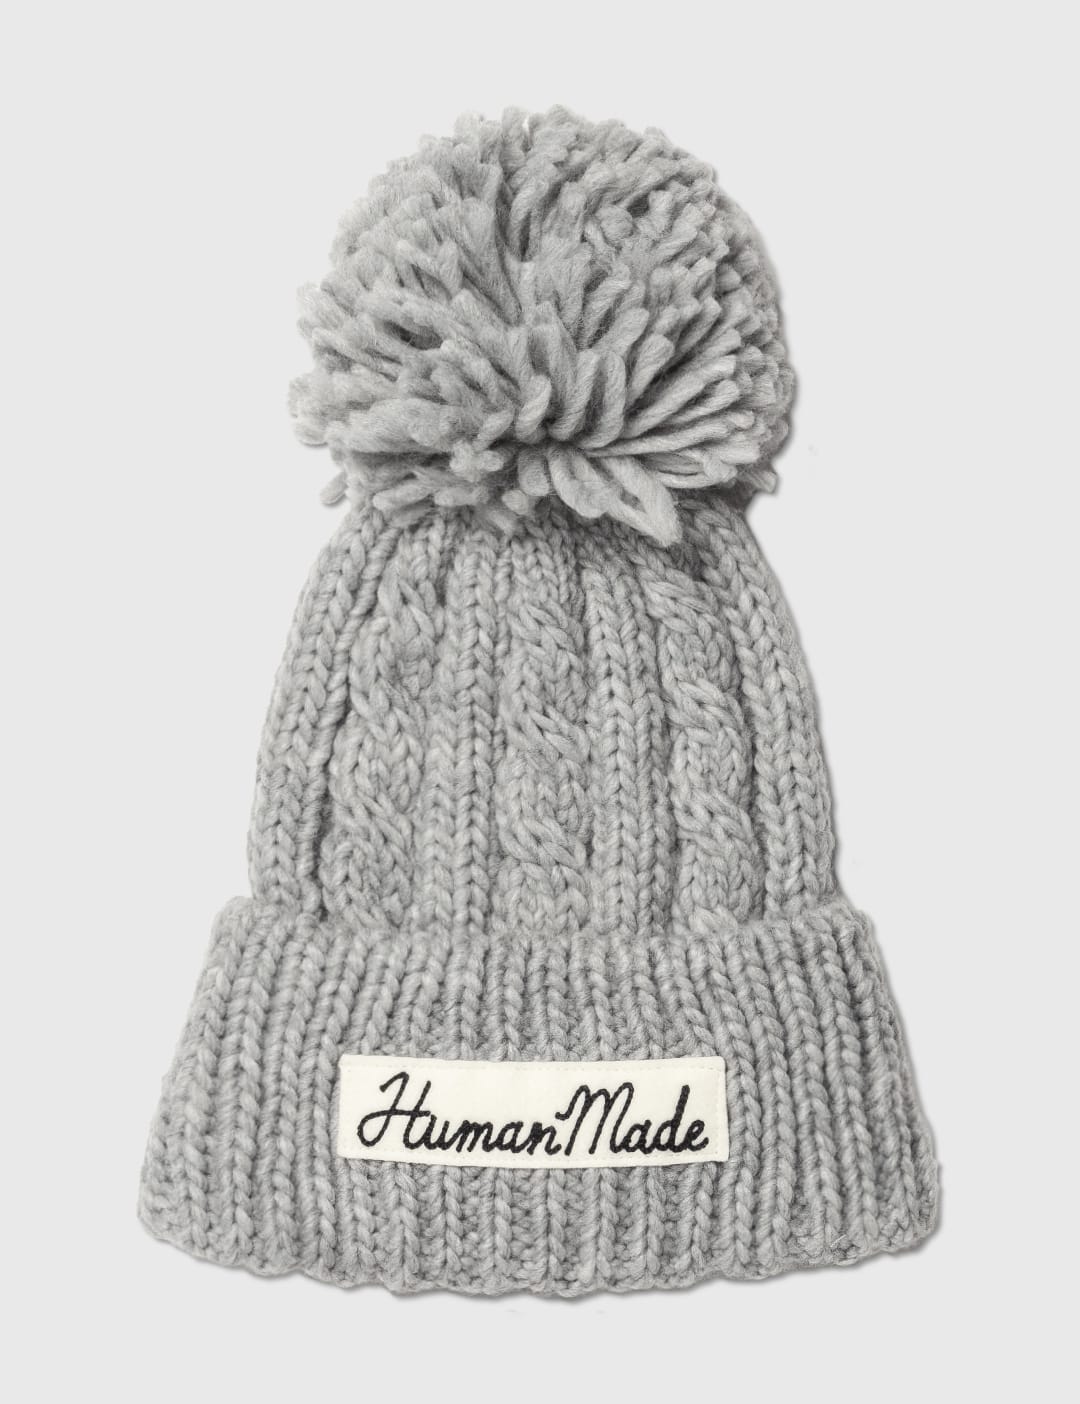 Human Made - Heart Knit Sweater | HBX - Globally Curated Fashion 